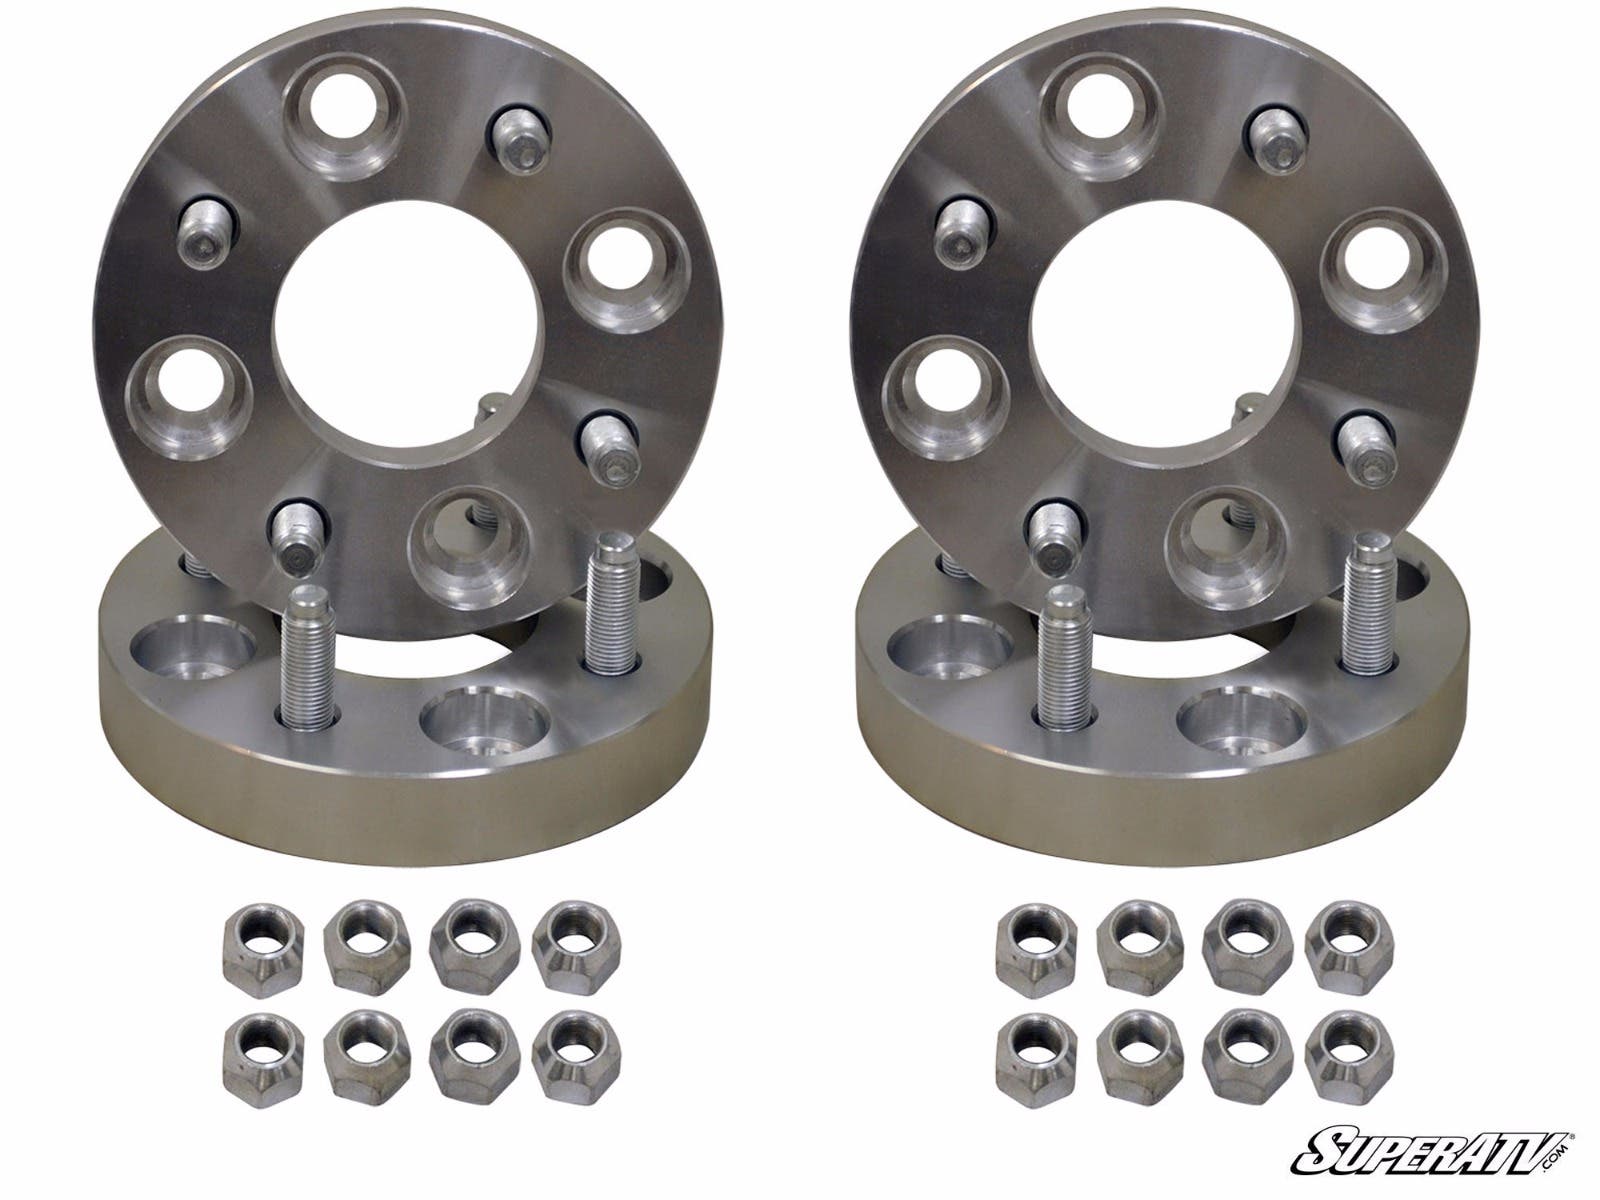 Super Atv Wheel Adapter/Spacer 4/110 To 4/156 (1.5-Inch)